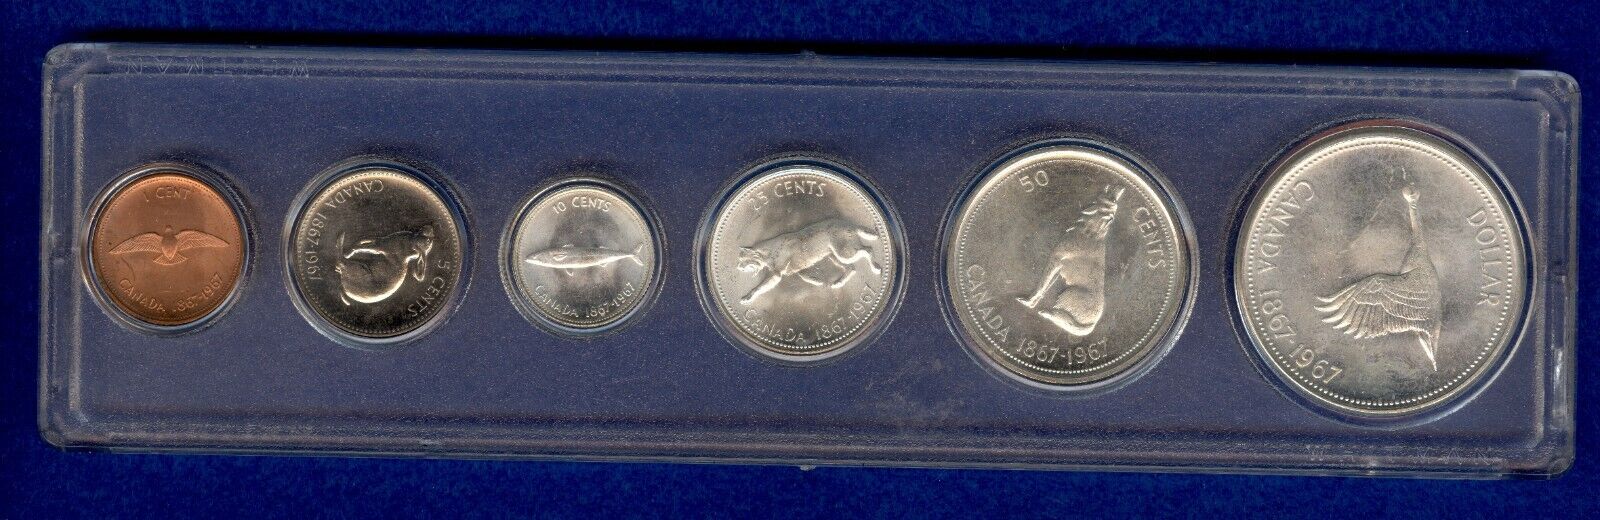 1867-1967 Canadian 6 Coin Uncirculated Wildlife Coin Set